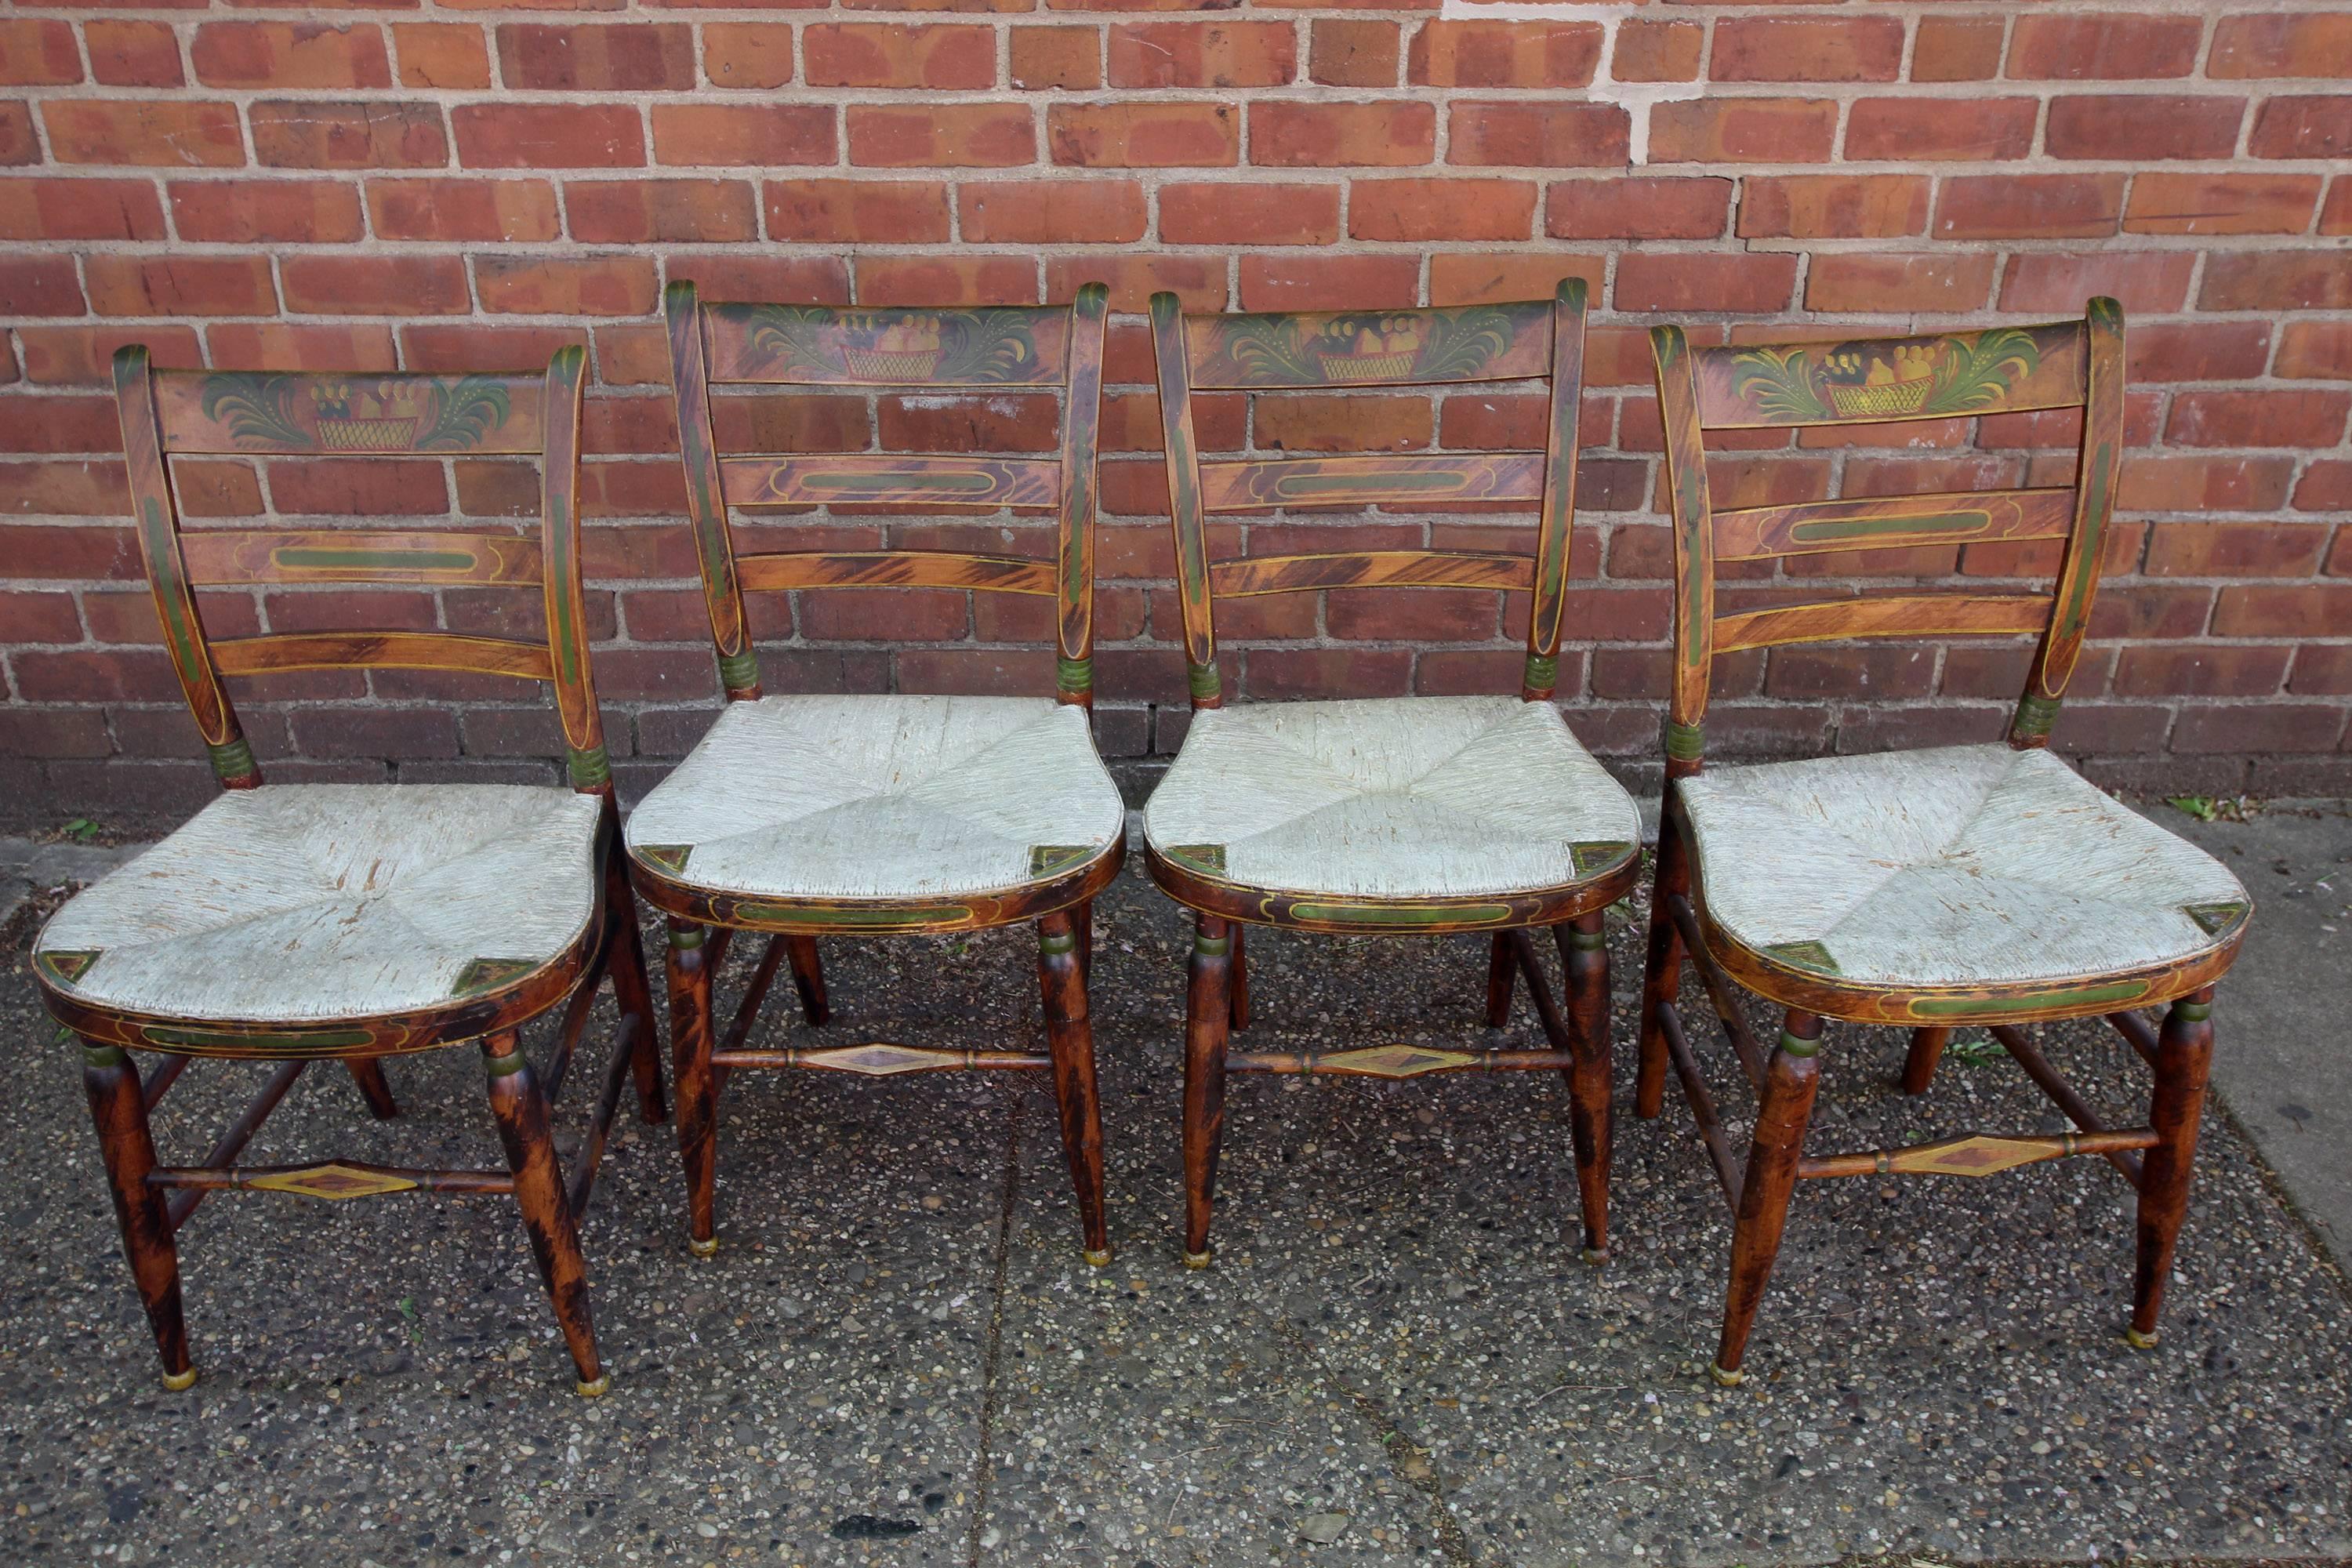 Six excellent paint decorated, rush seat dining chairs, four side chairs and a pair of armchairs all with painted free-form and stencilled fruit or baskets of fruit. The side chairs are all original, including their painted rush seats. The armchairs